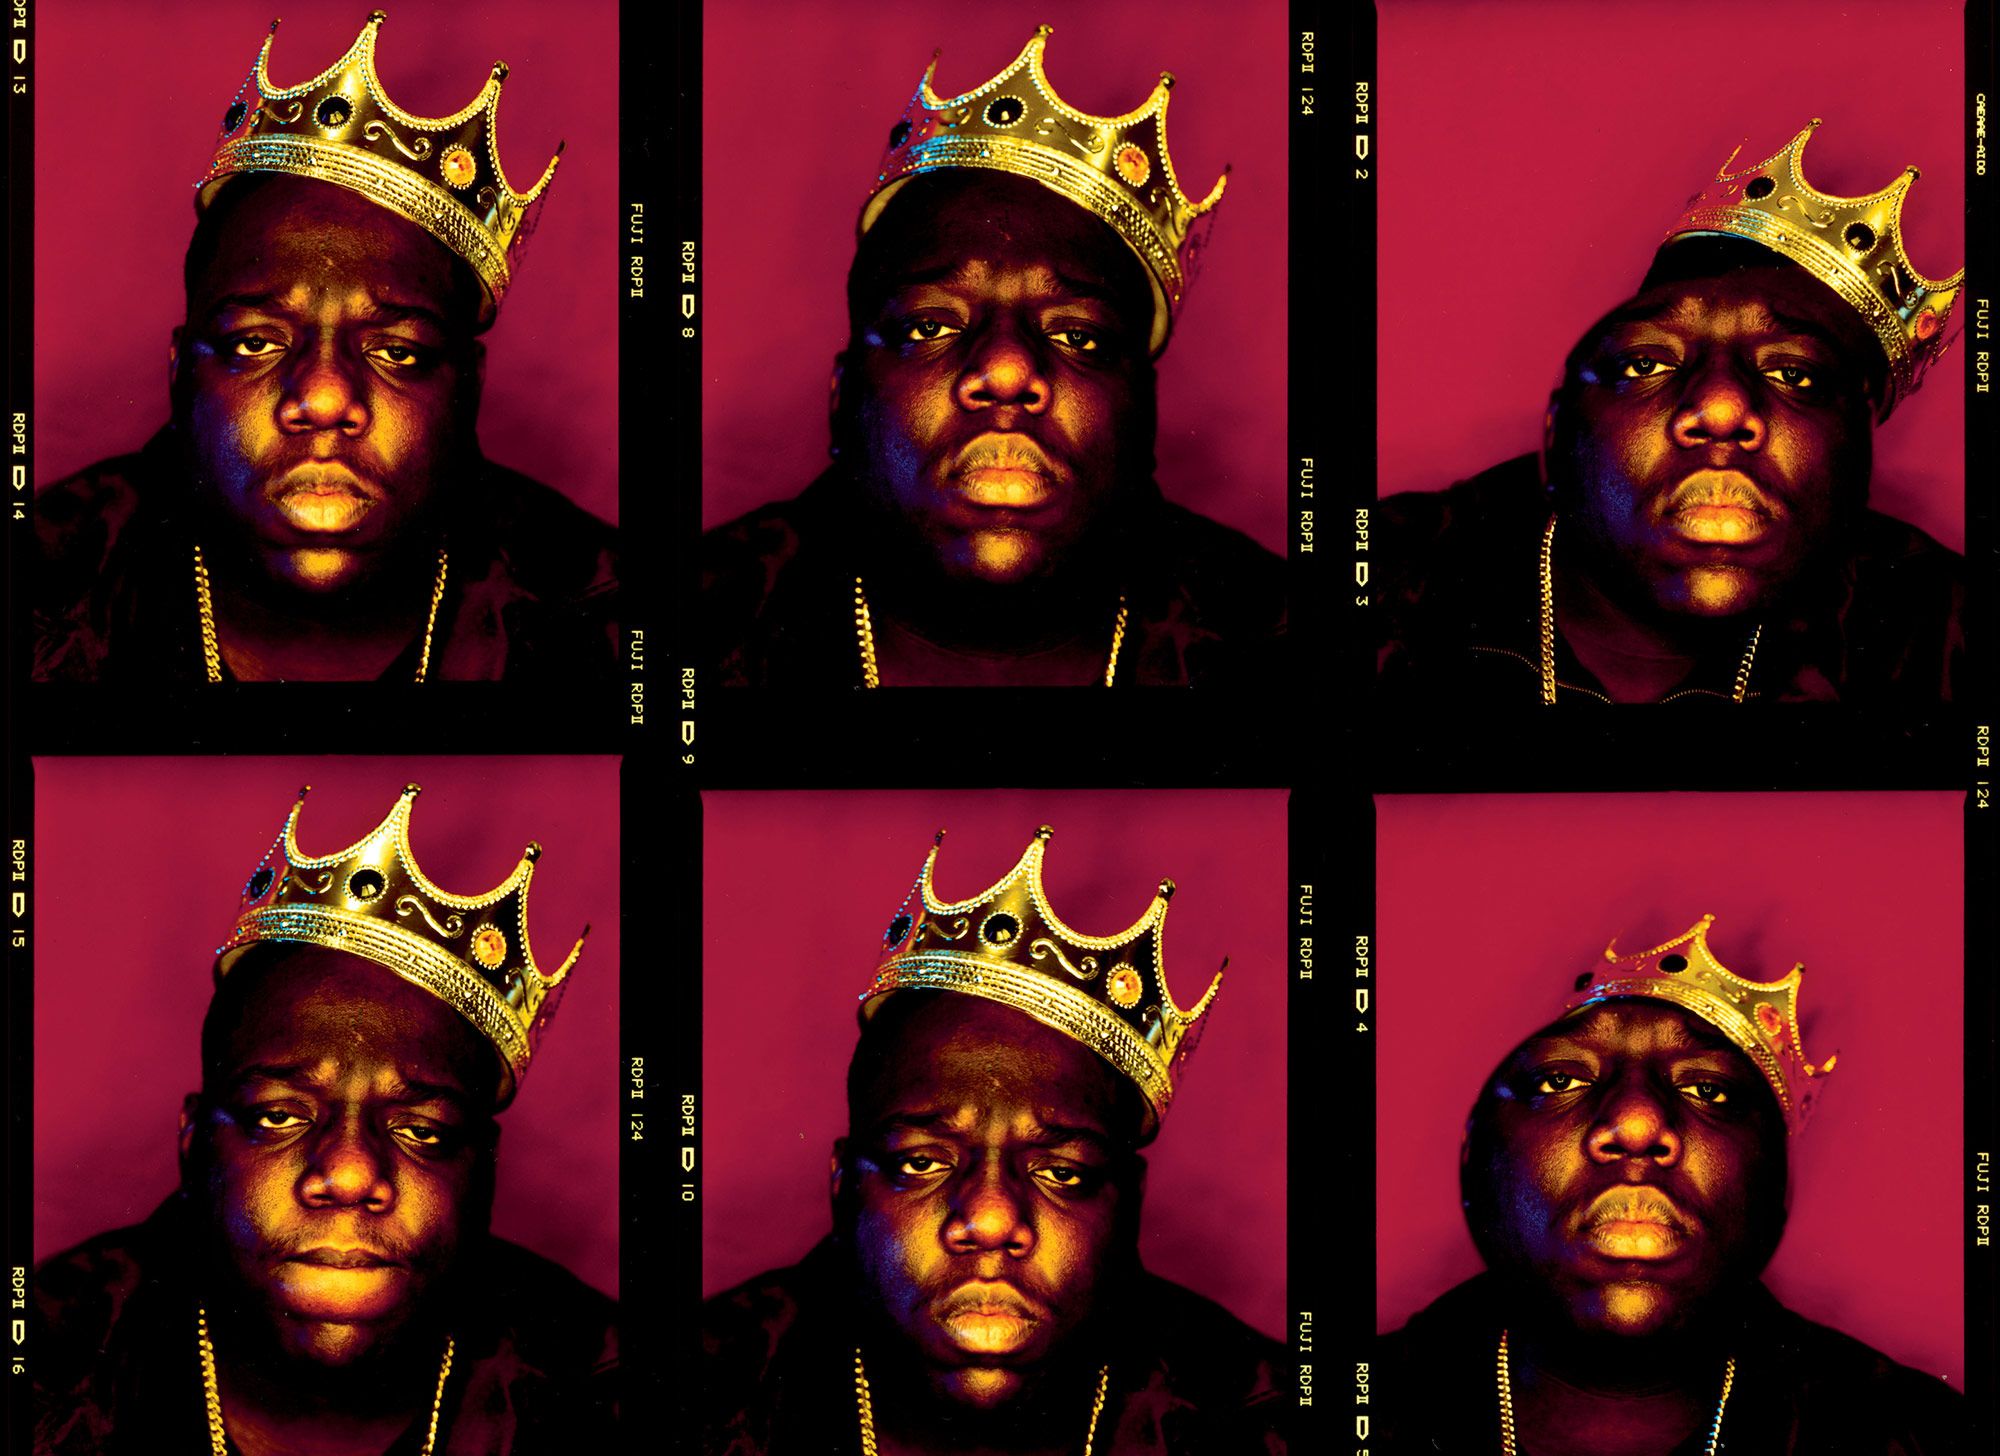 The Stories Behind Hip Hop's Most Iconic Image